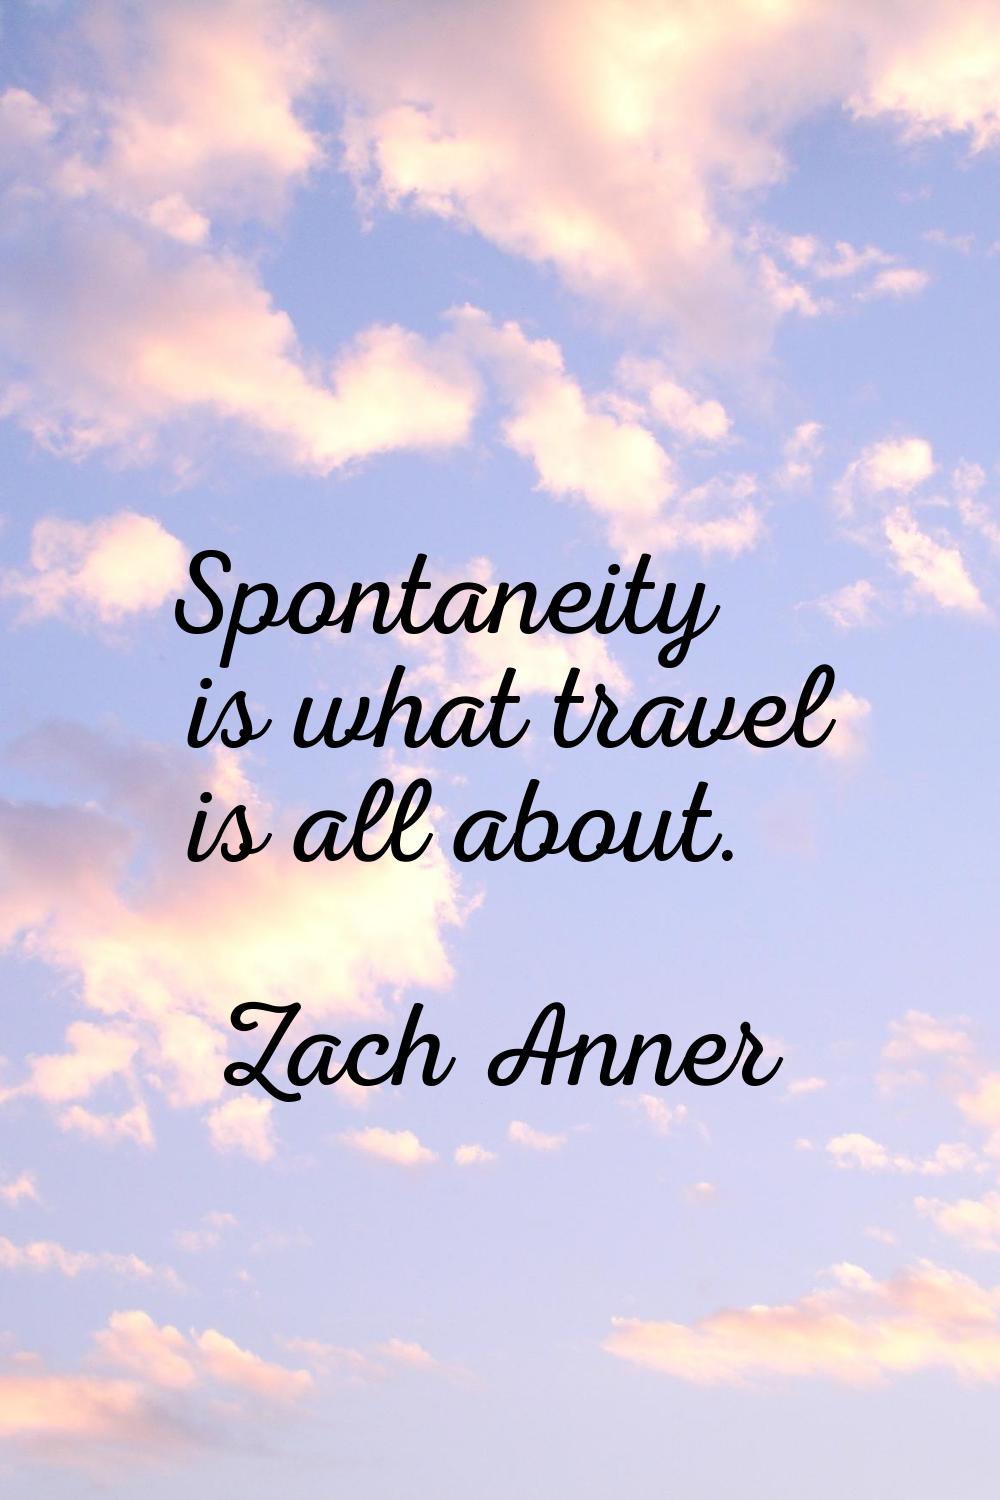 Spontaneity is what travel is all about.